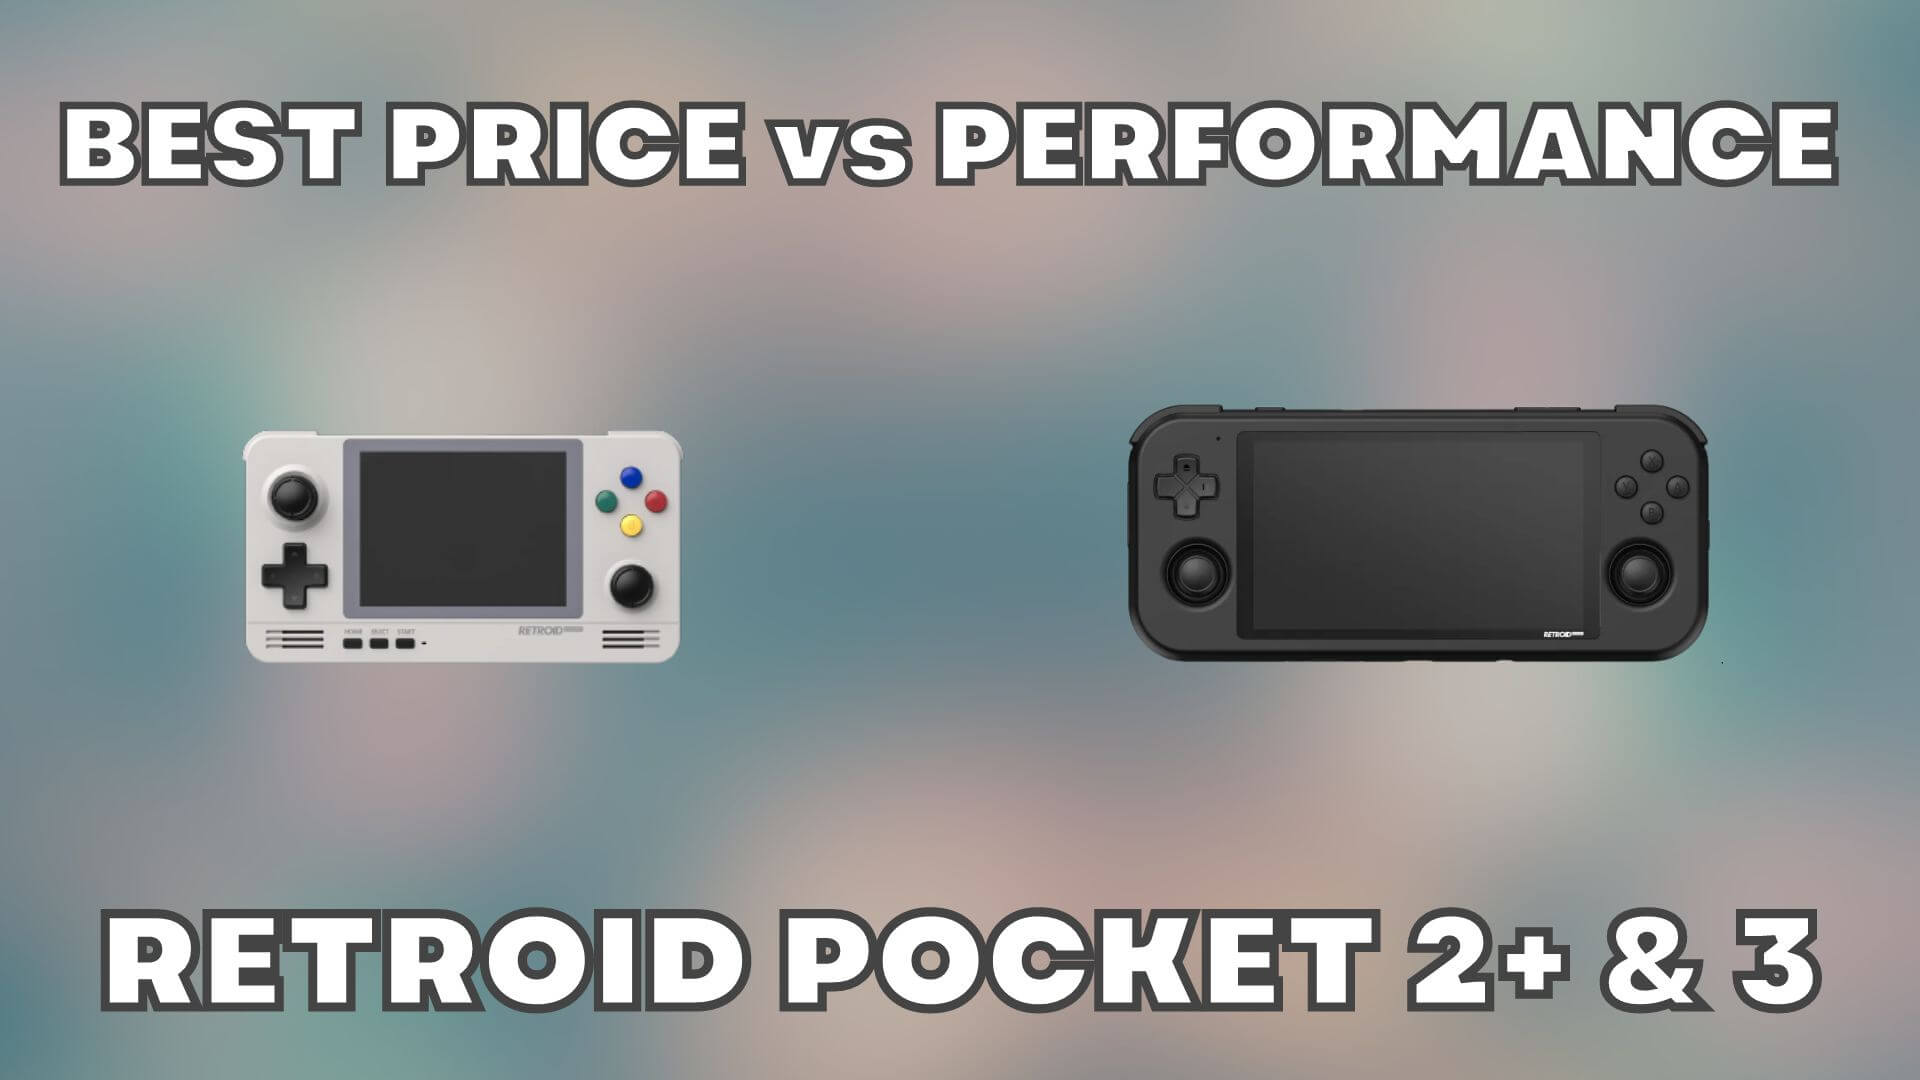 Retroid Pocket 3 Review - Android retro gaming handheld - DroiX Blogs